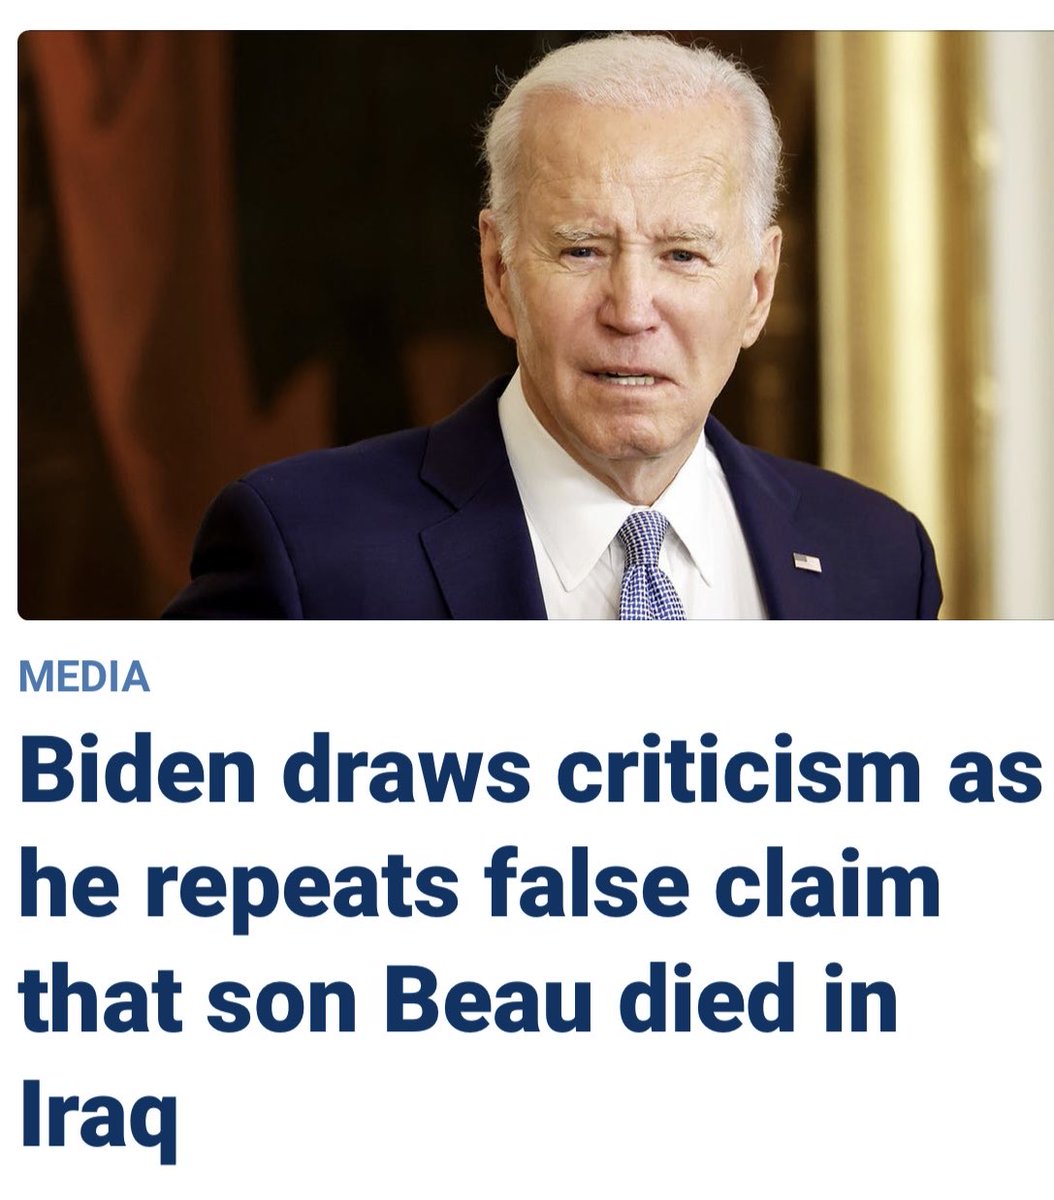 This dangerous moron ⁦@JoeBiden⁩ has no clue what truth is. His son did NOT die in Iraq as he lied multiple times. Beau Biden was in Iraq in 2009. He sadly died 2015 in the US while serving as the AG for Delaware. Lying is as natural to Biden as breathing.